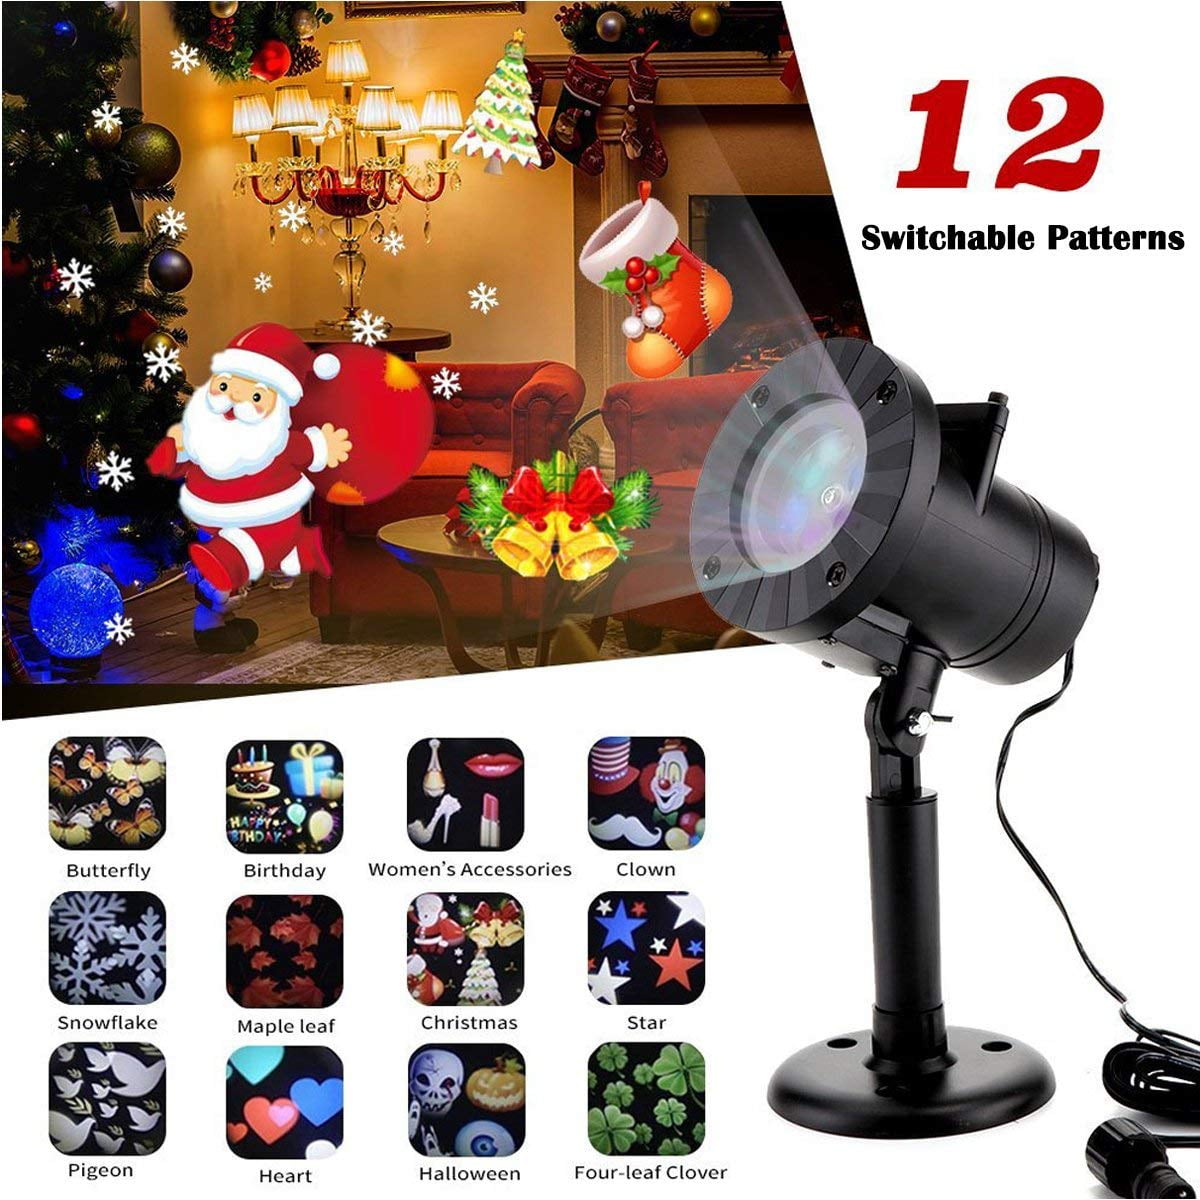 krofaue Christmas LED Projector Lights Outdoor 2-in-1 Water Pattern Lamp 12 for